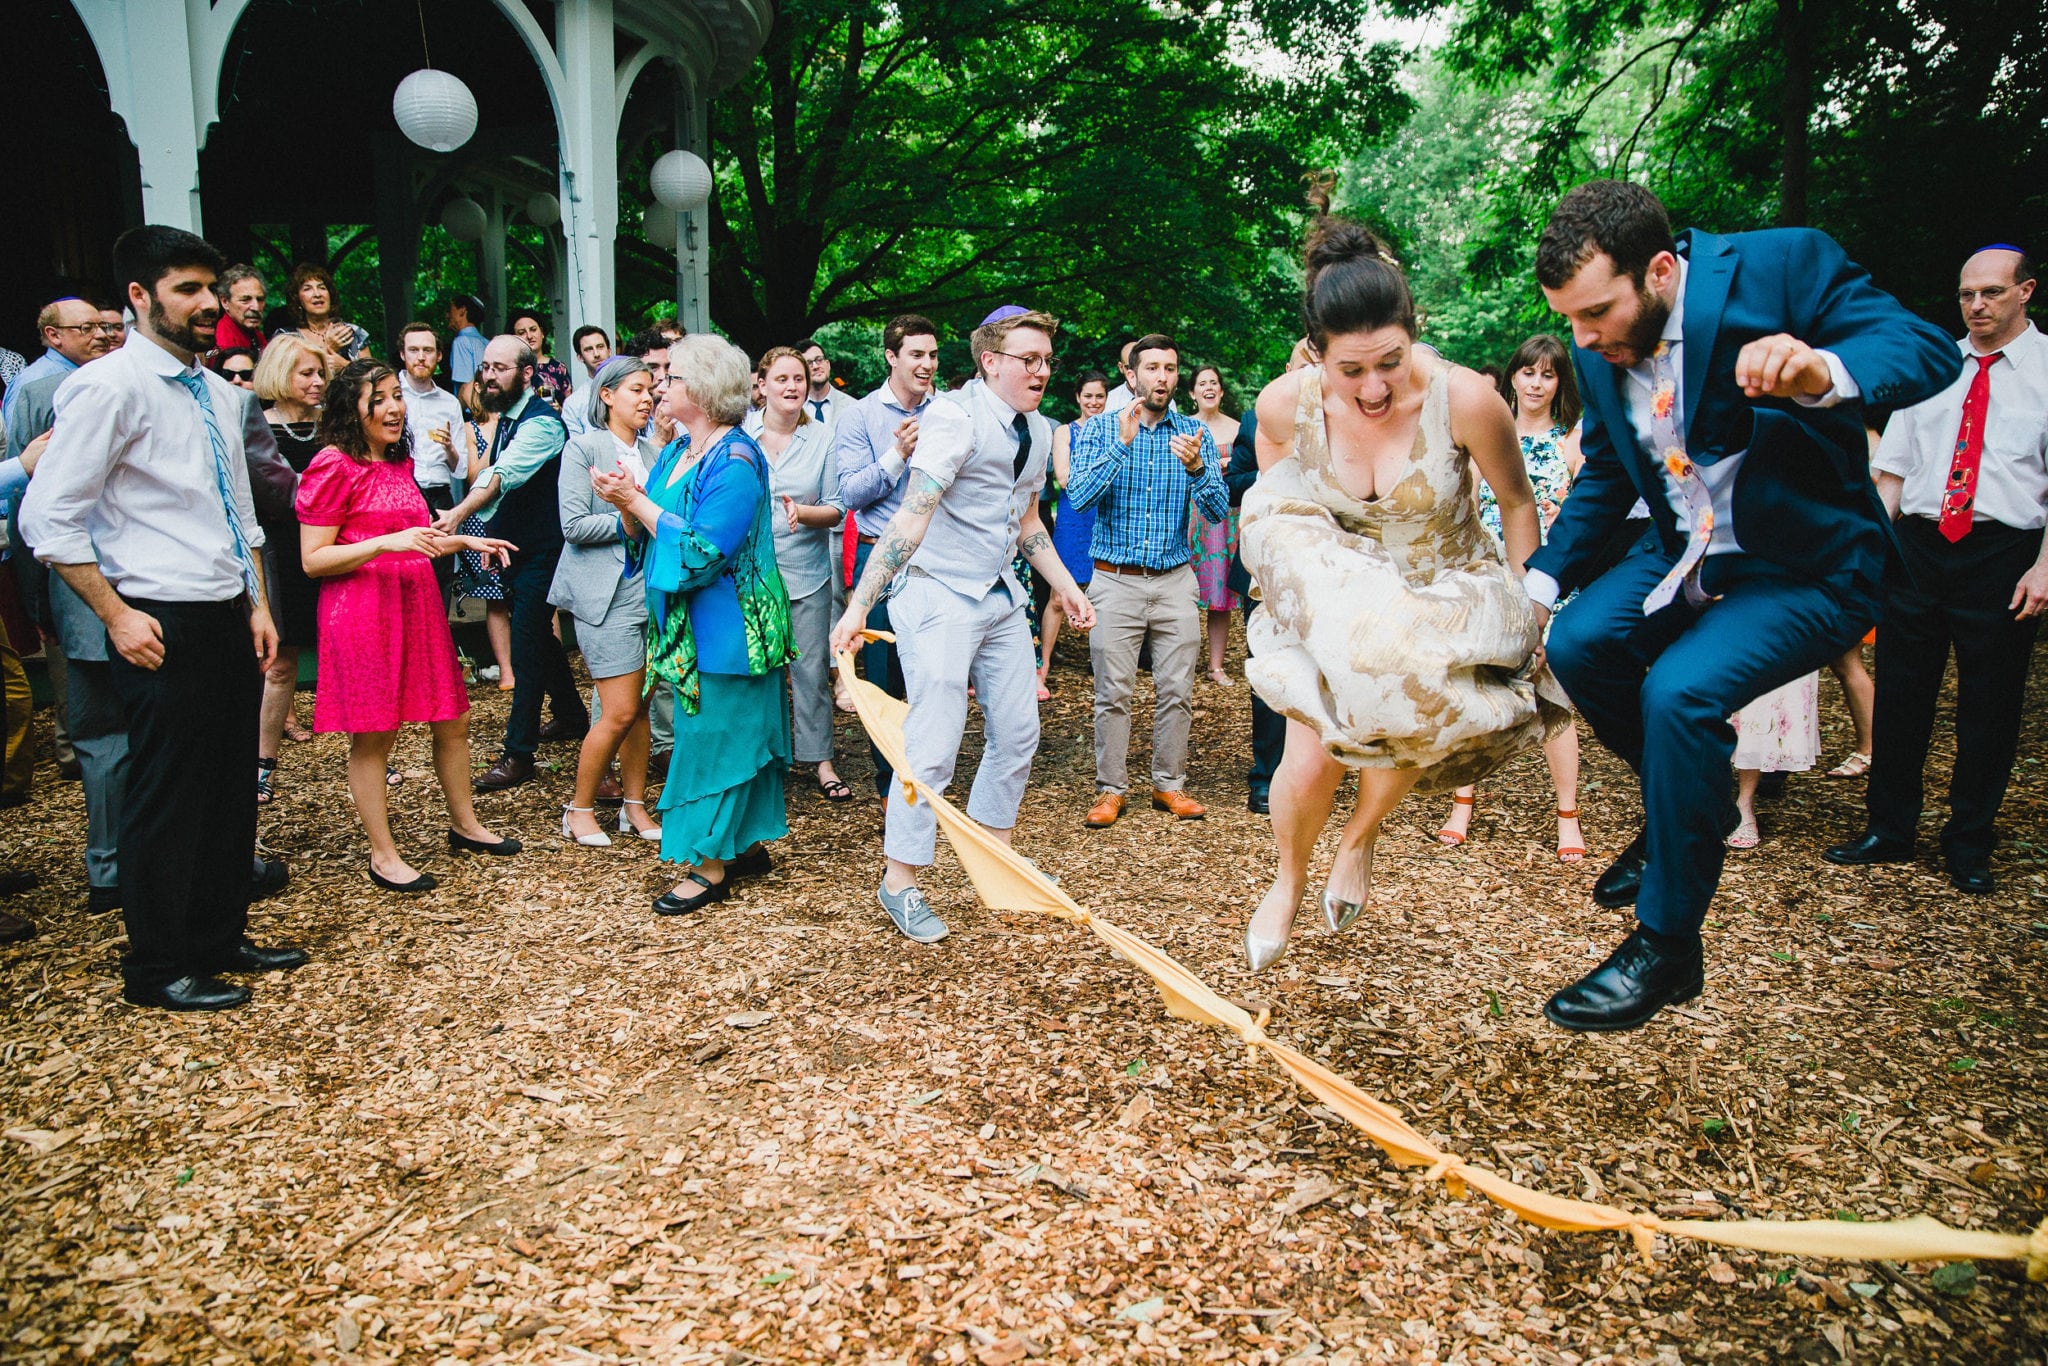 a bride and groom jump rope at an outdoor wedding reception as friends and family look on